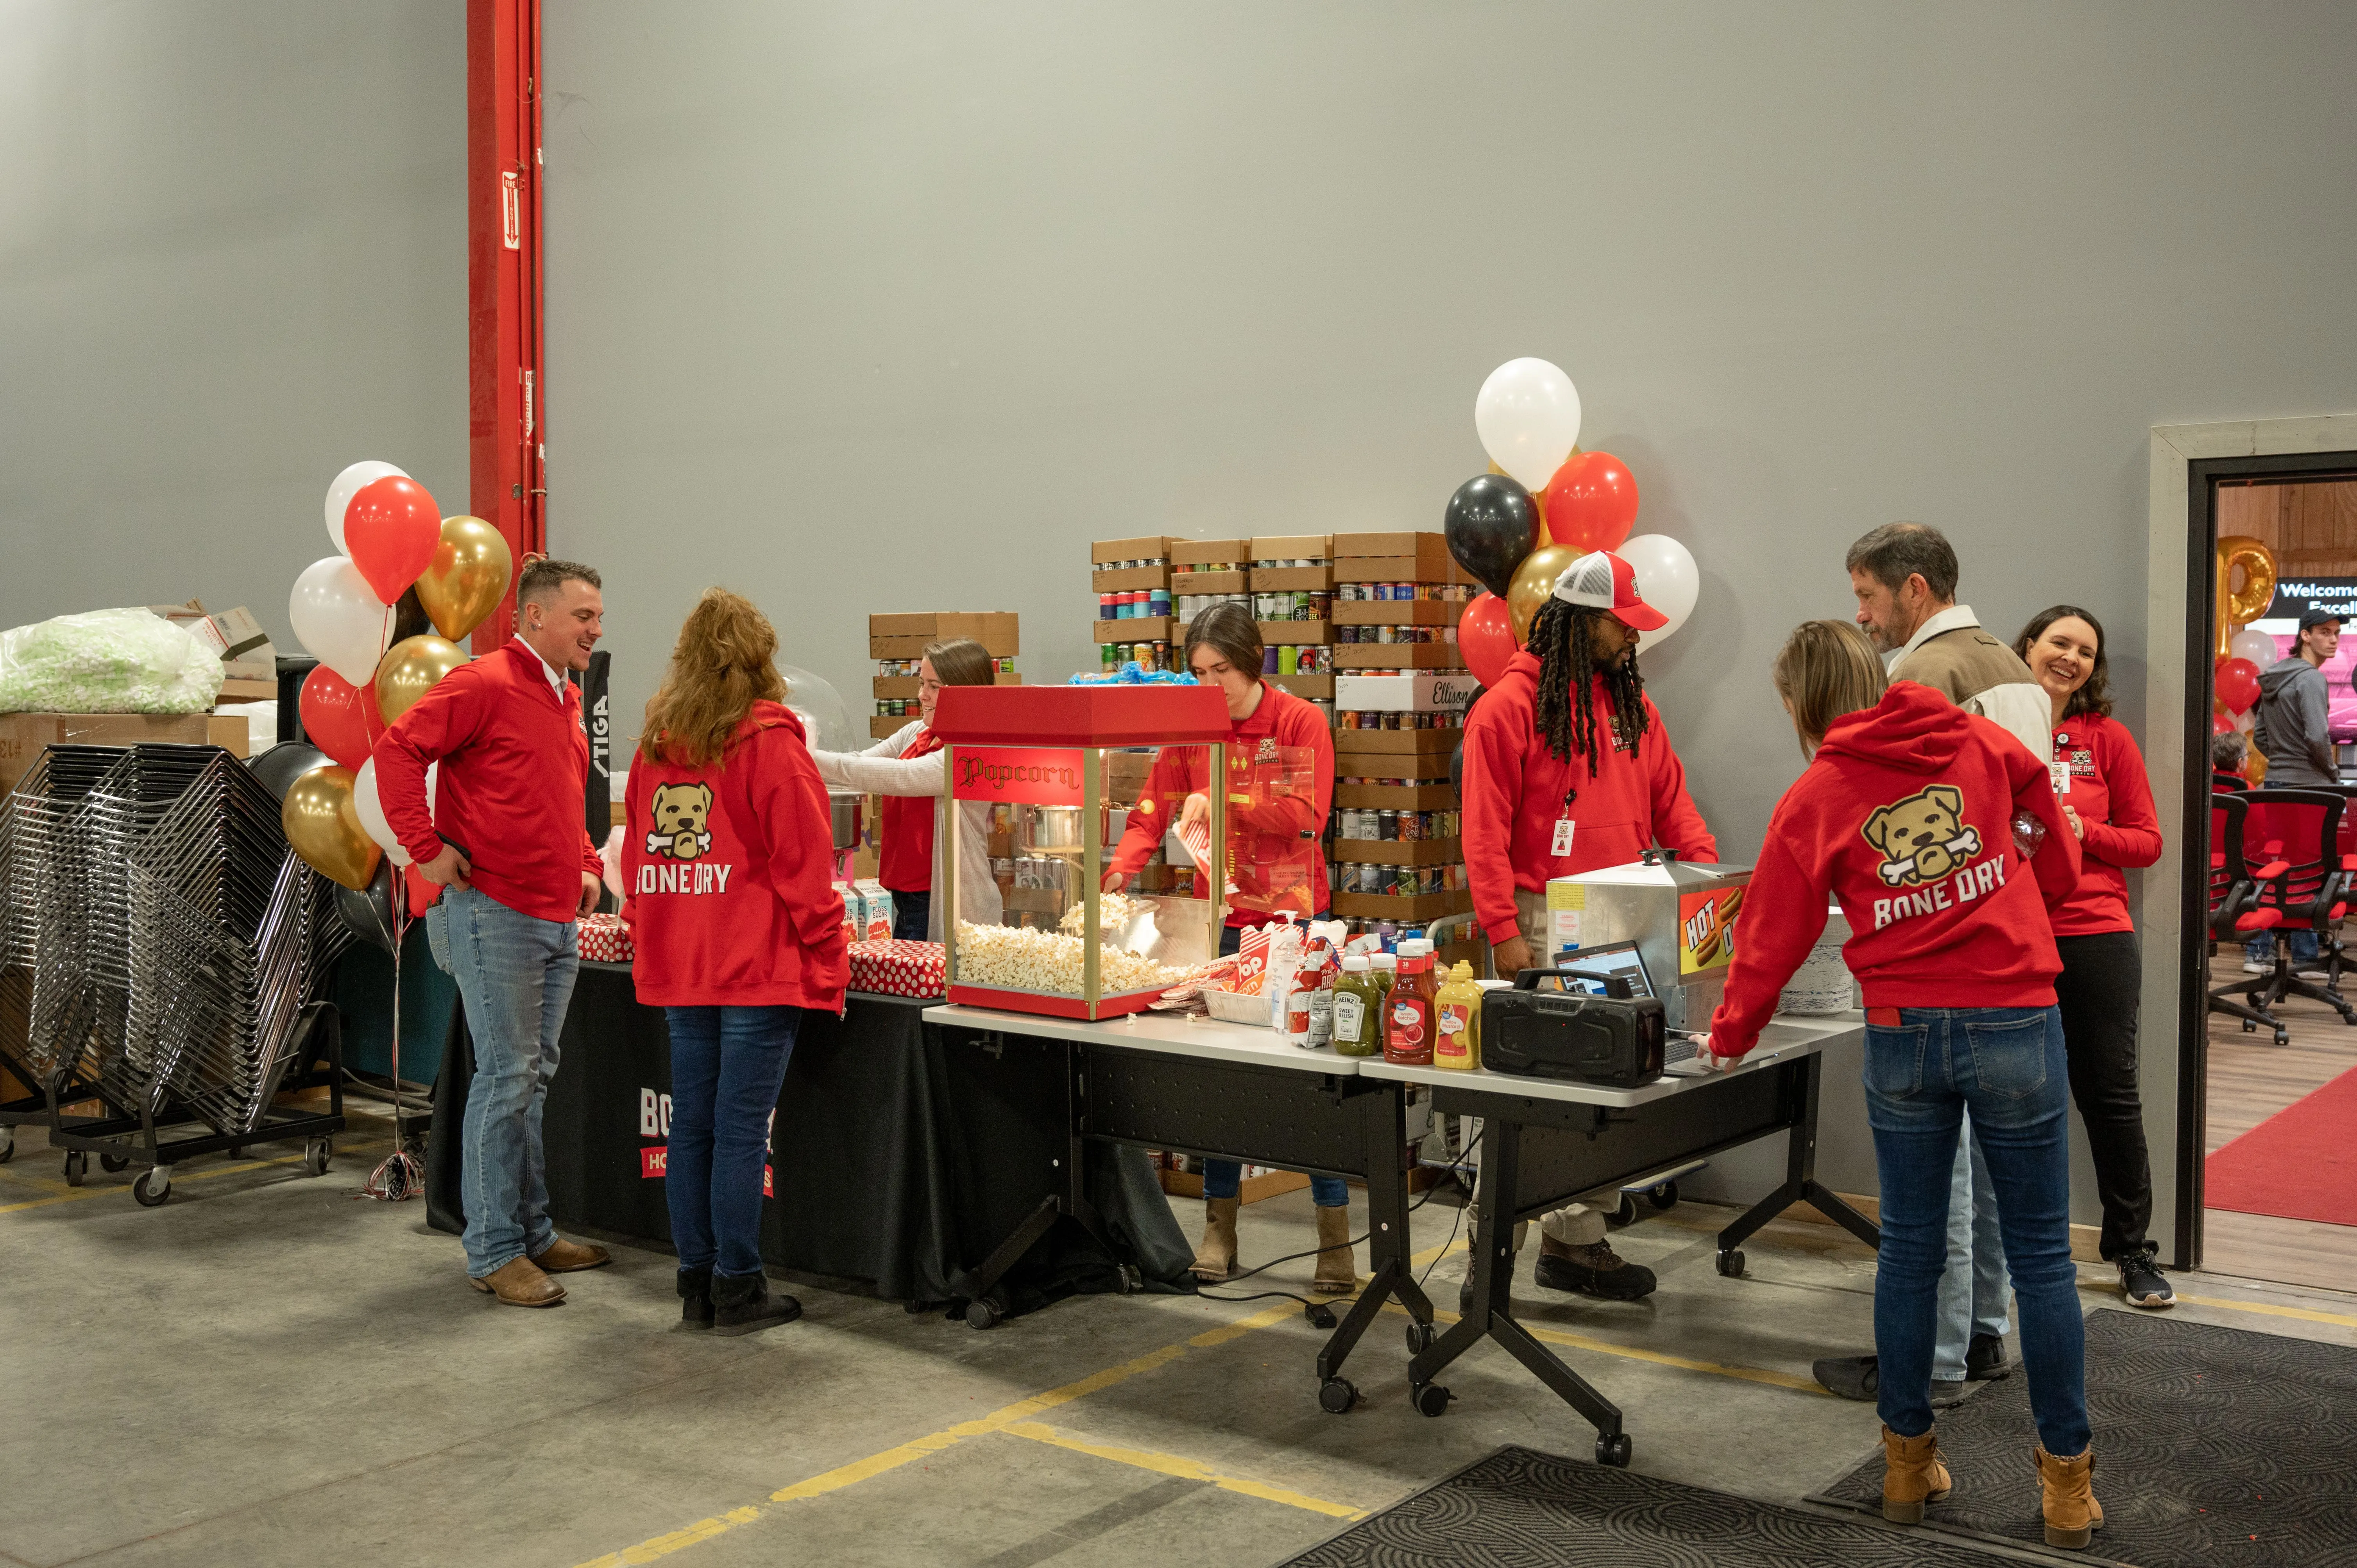 Group of people wearing red shirts gathered around a booth with red and white balloons at an indoor event.